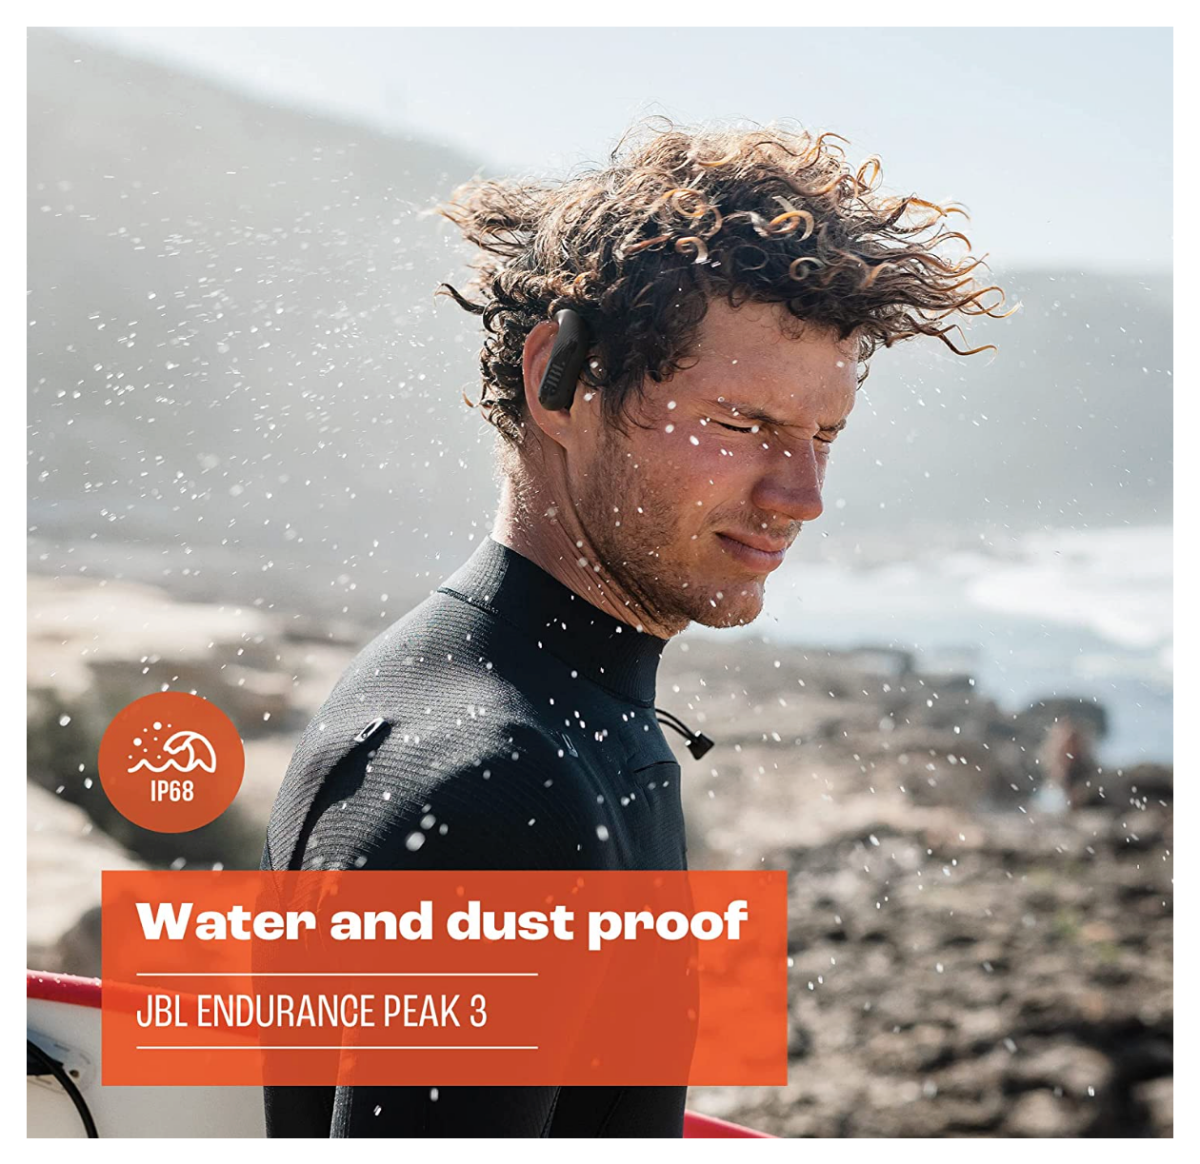 A surfer getting wet whil wearing the JBL Endurance Peak 3 earbuds